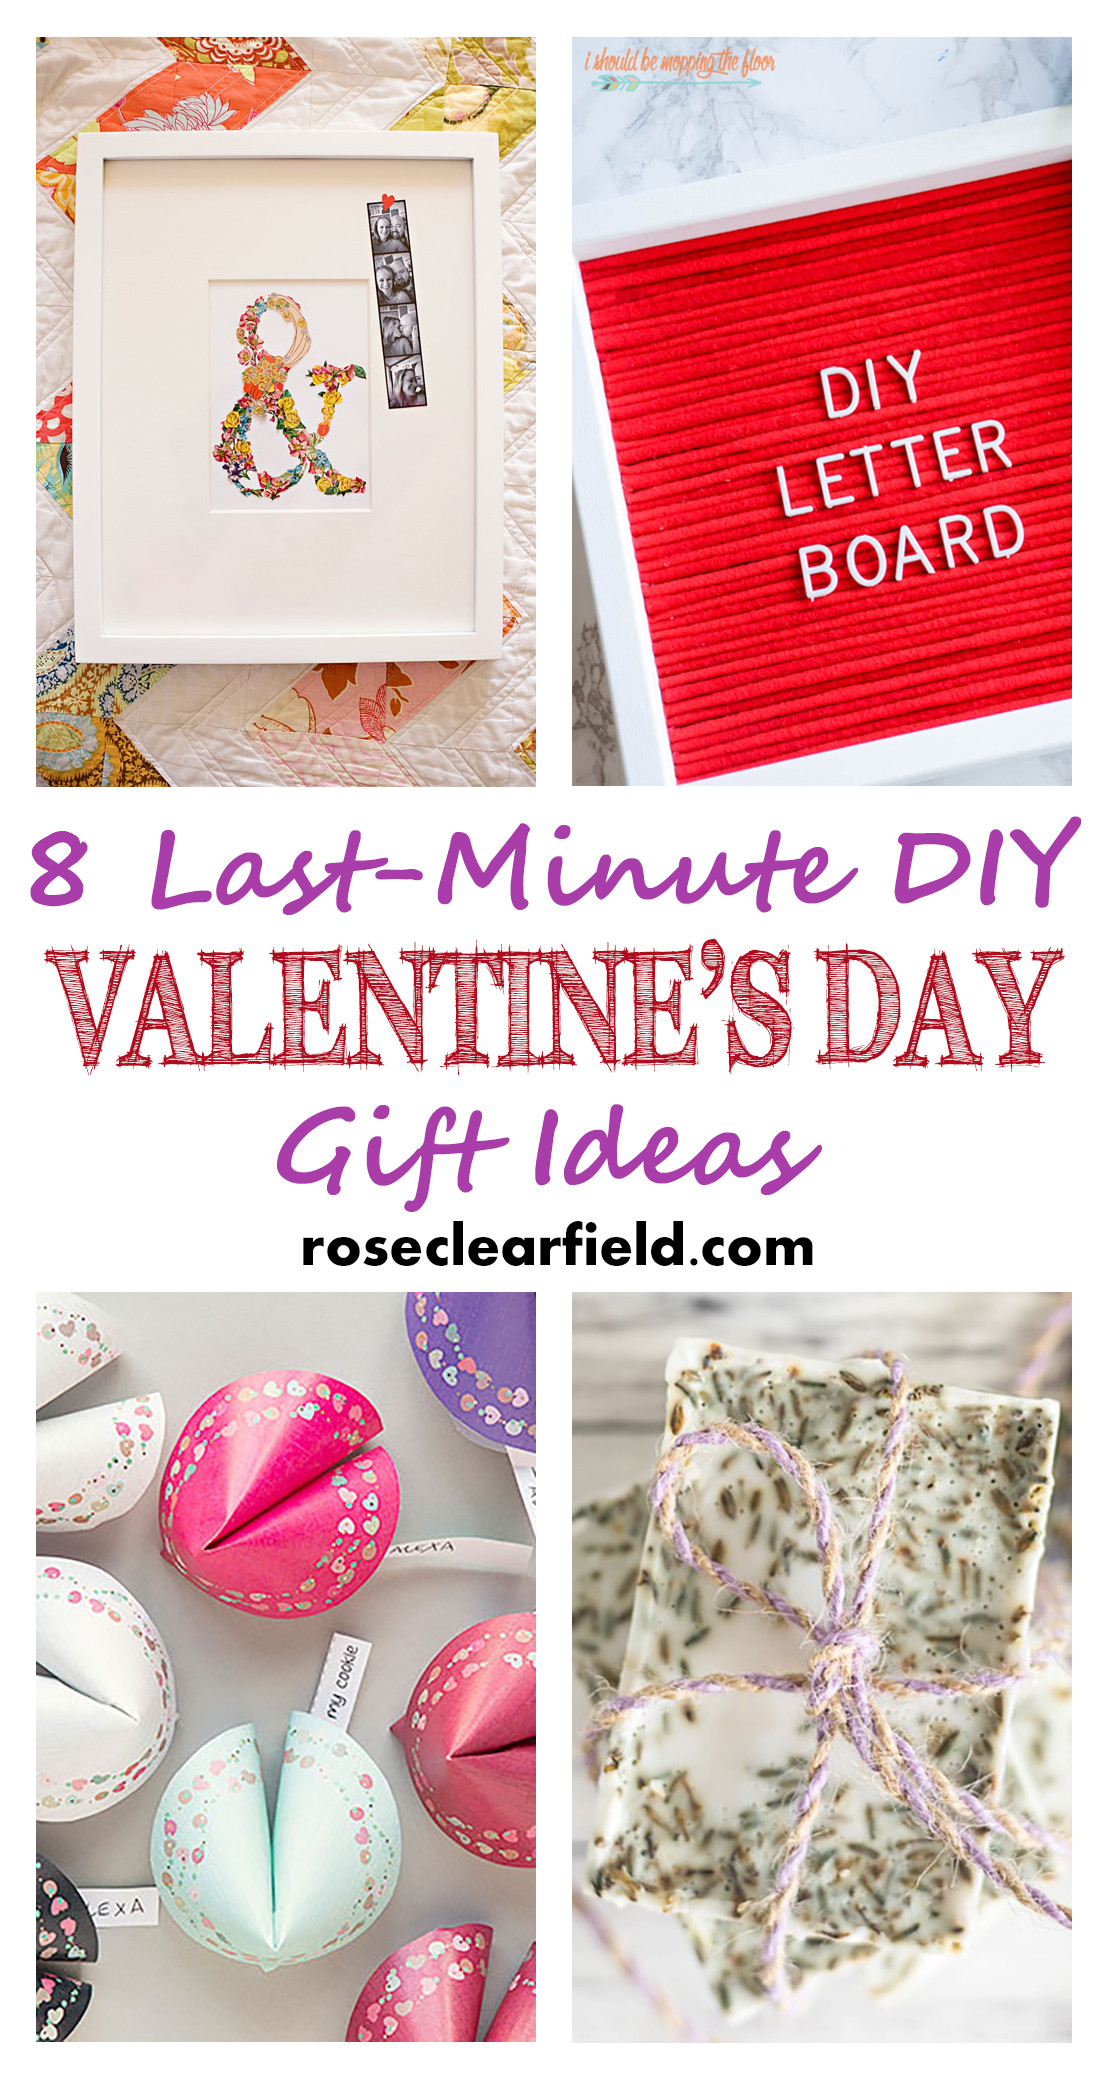 Valentines Gift Ideas Diy
 Last Minute DIY Valentine s Day Gift Ideas • Rose Clearfield